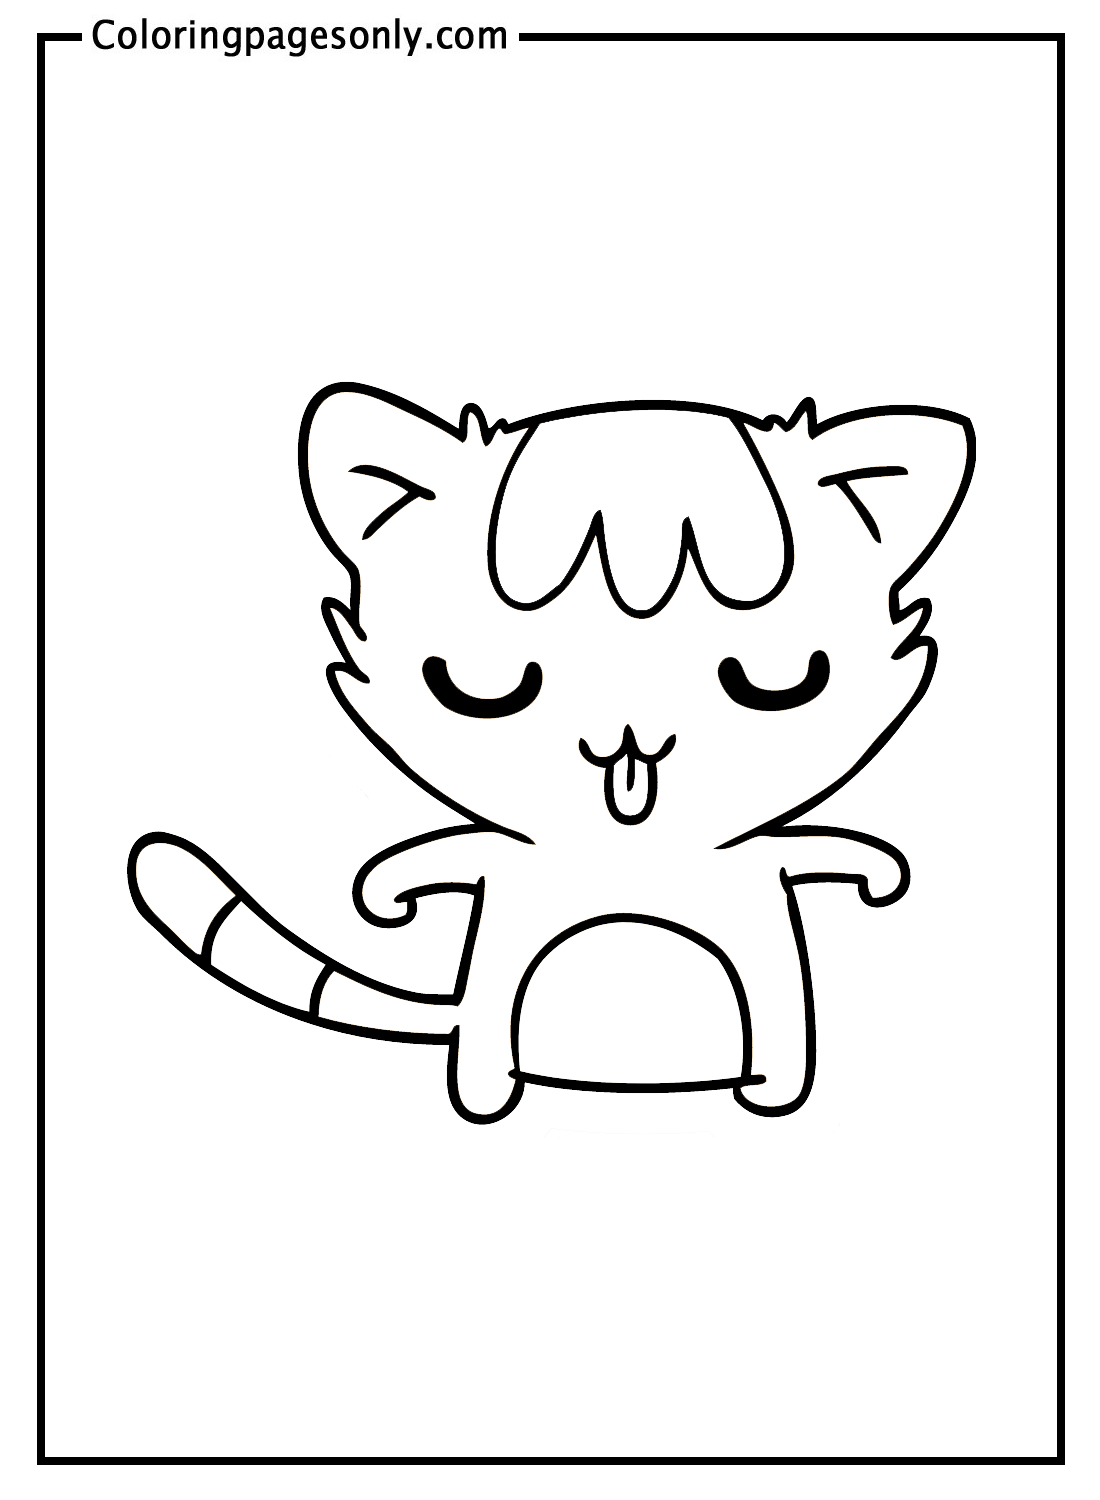 Sticker Cute Cat Coloring Pages